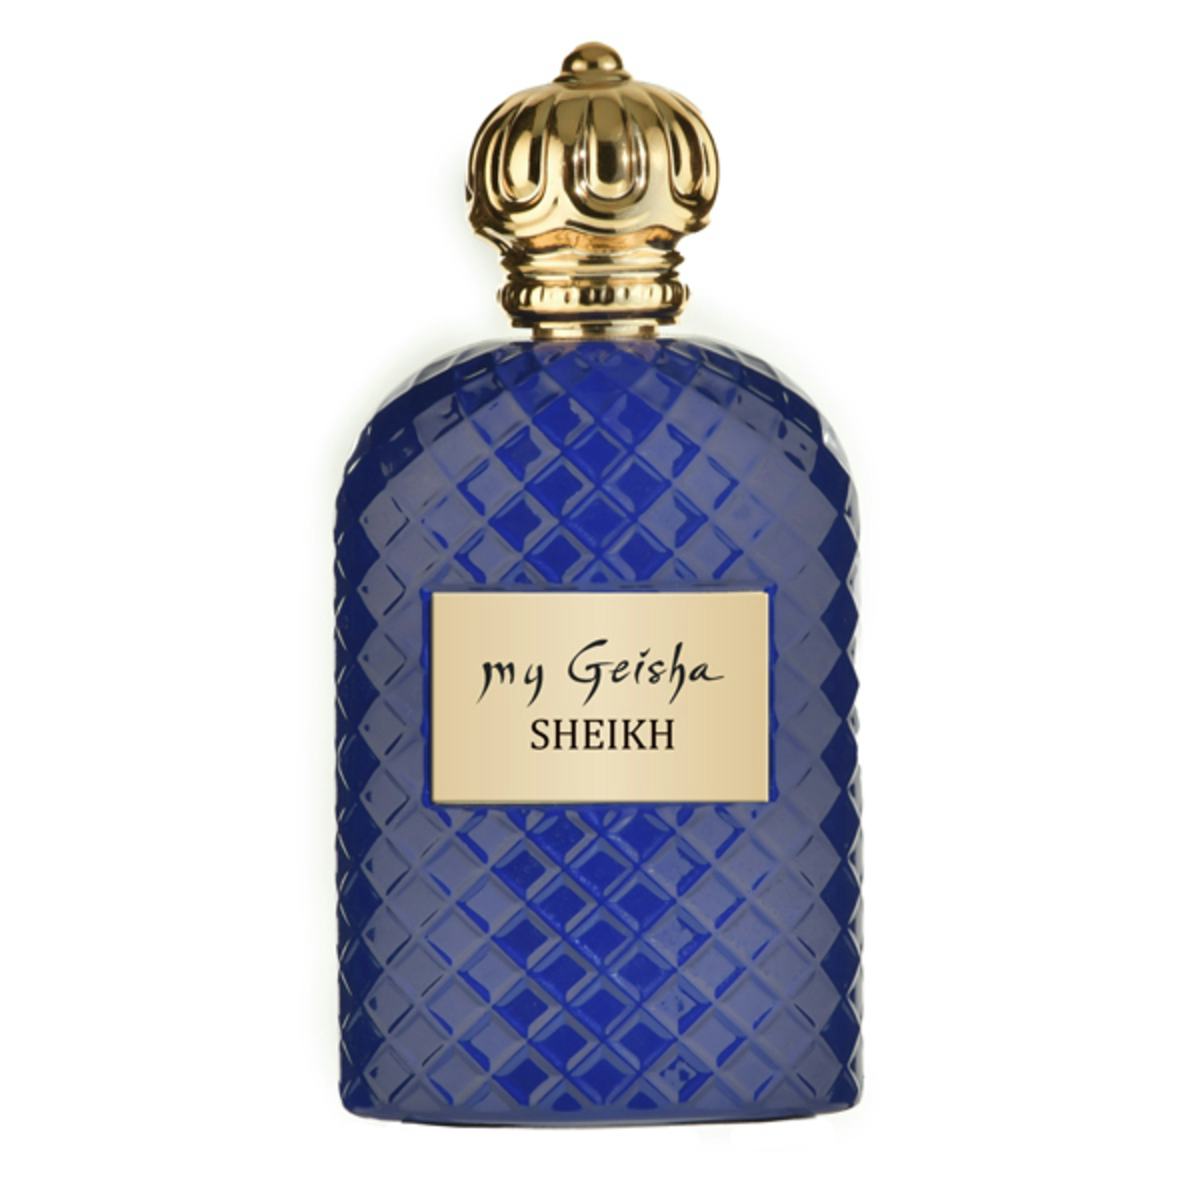 SHEIKH perfume extract 100 ml, artisanal product for direct sale in Switzerland